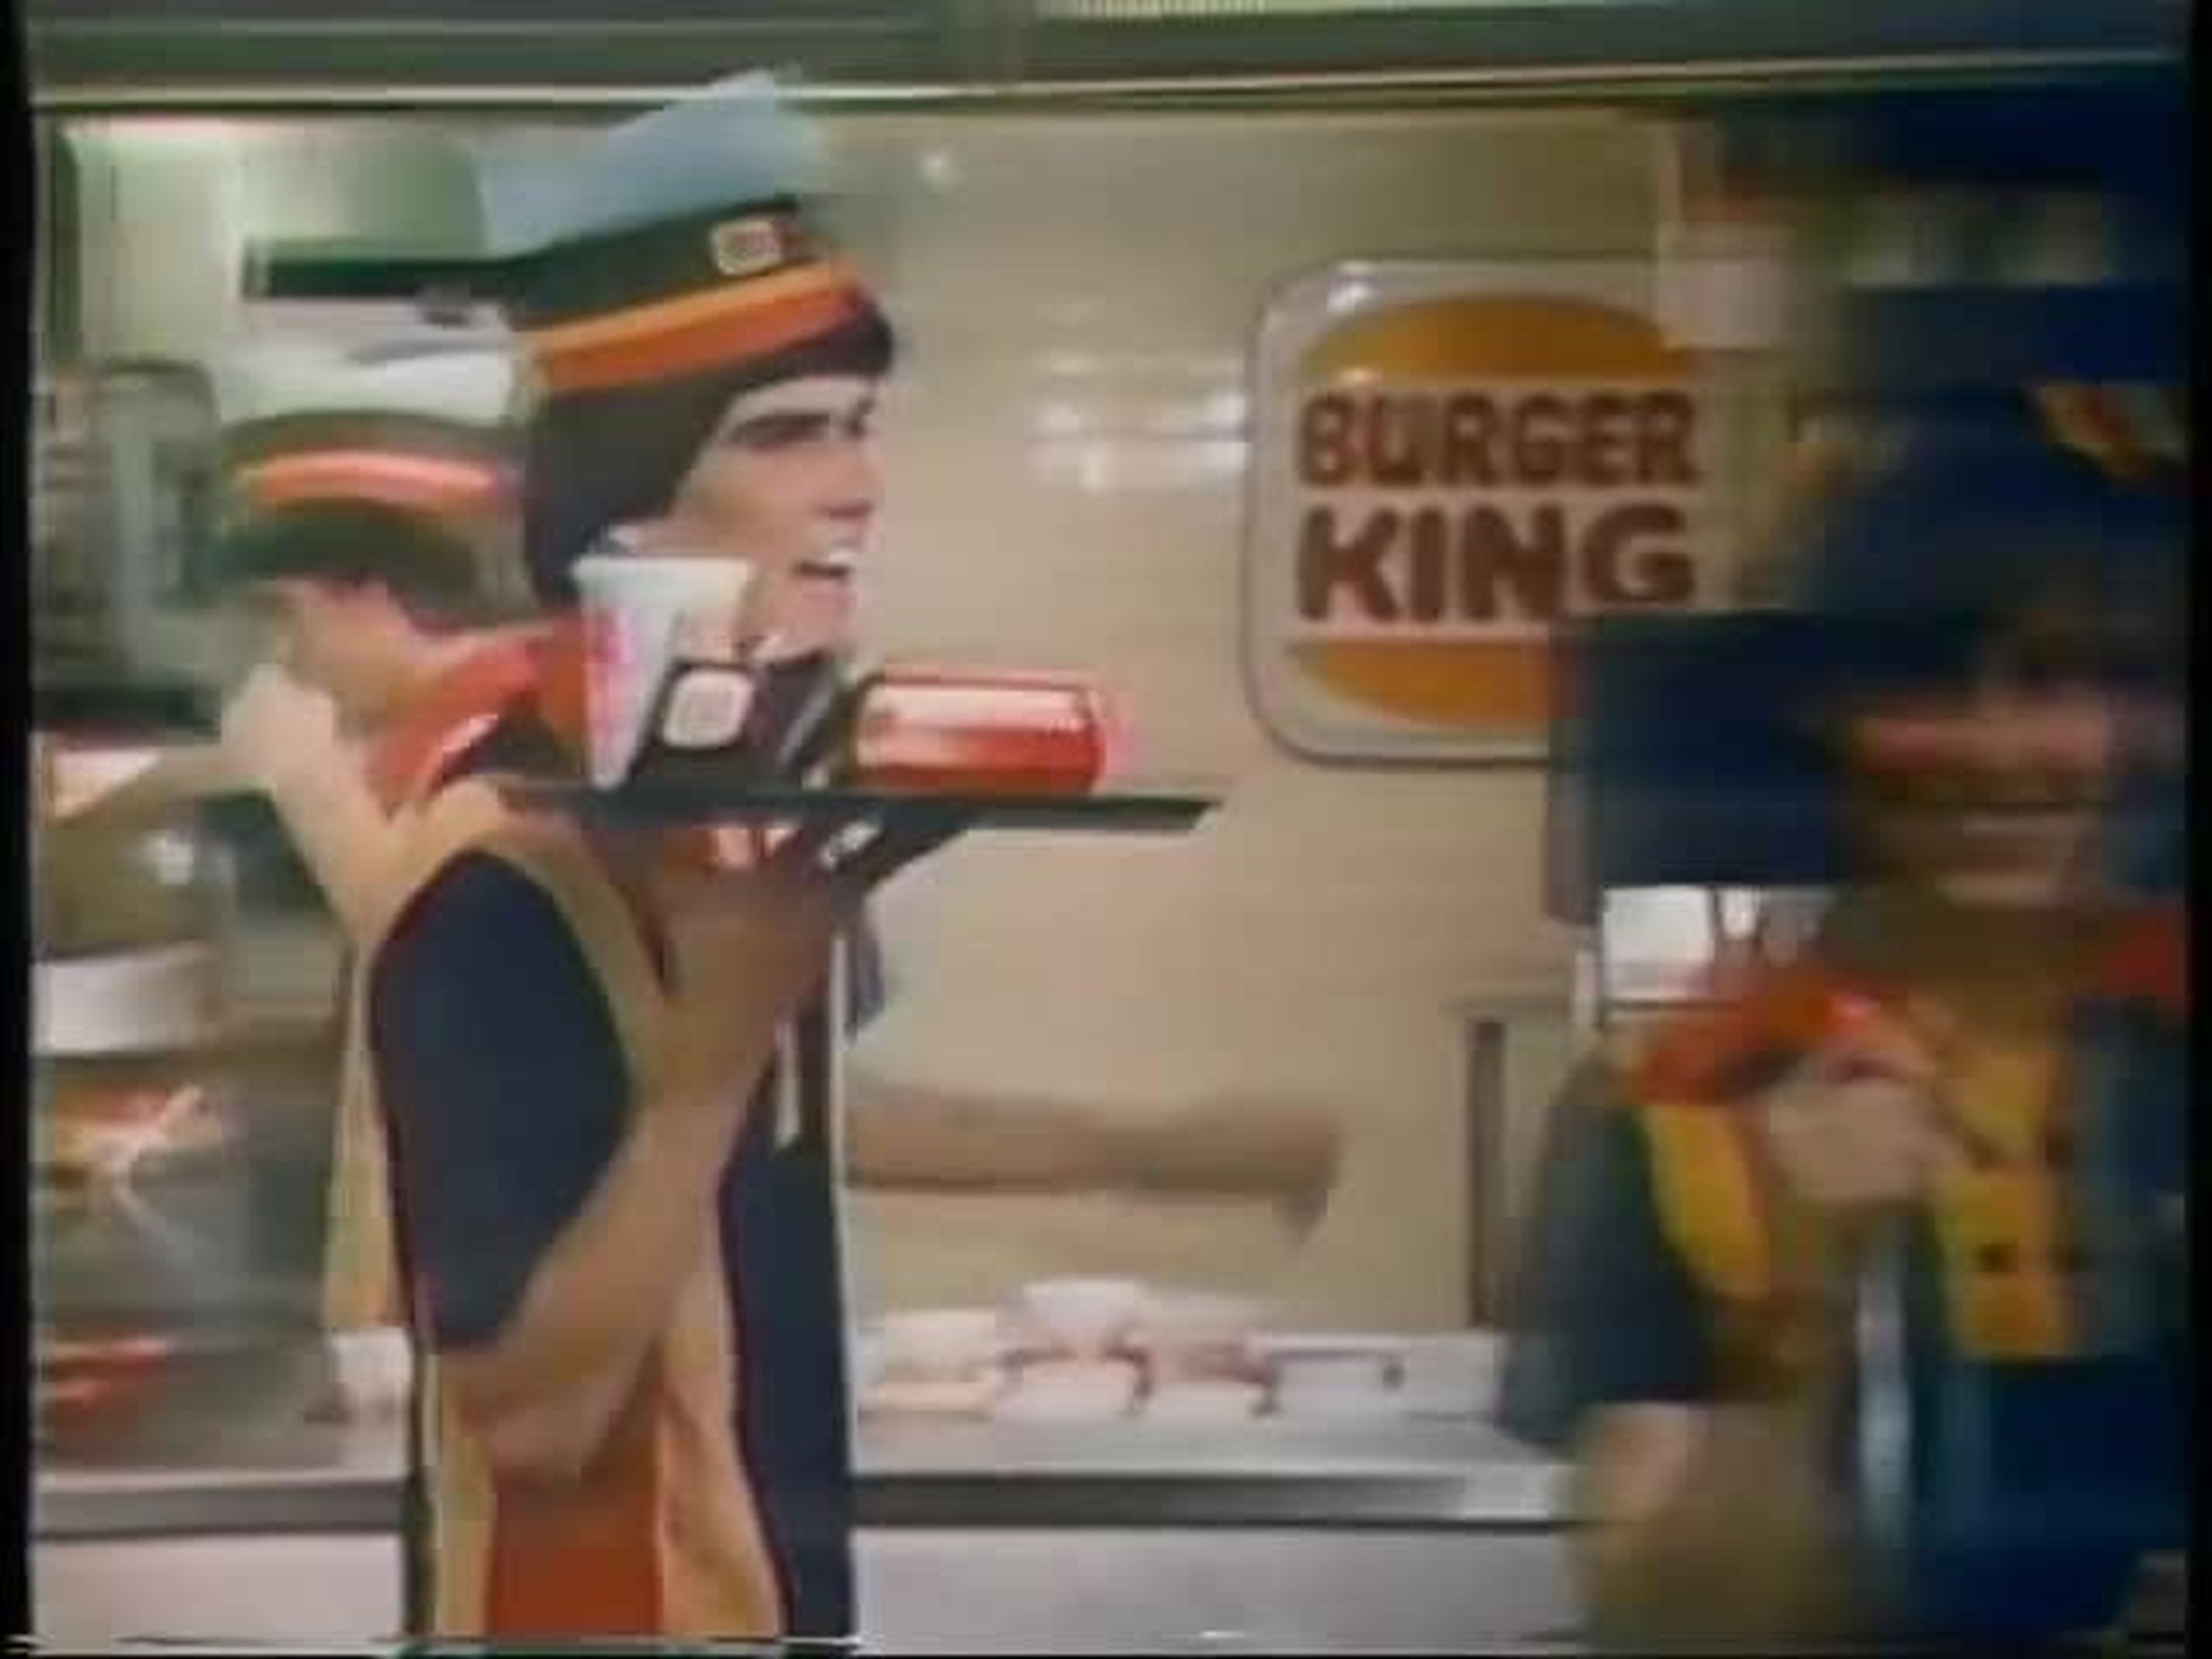 By 1979, Burger King added a dose of black and a dash of white to their uniforms. According to Machado, the 70s were a golden era of creativity when it came to the brand's uniforms.